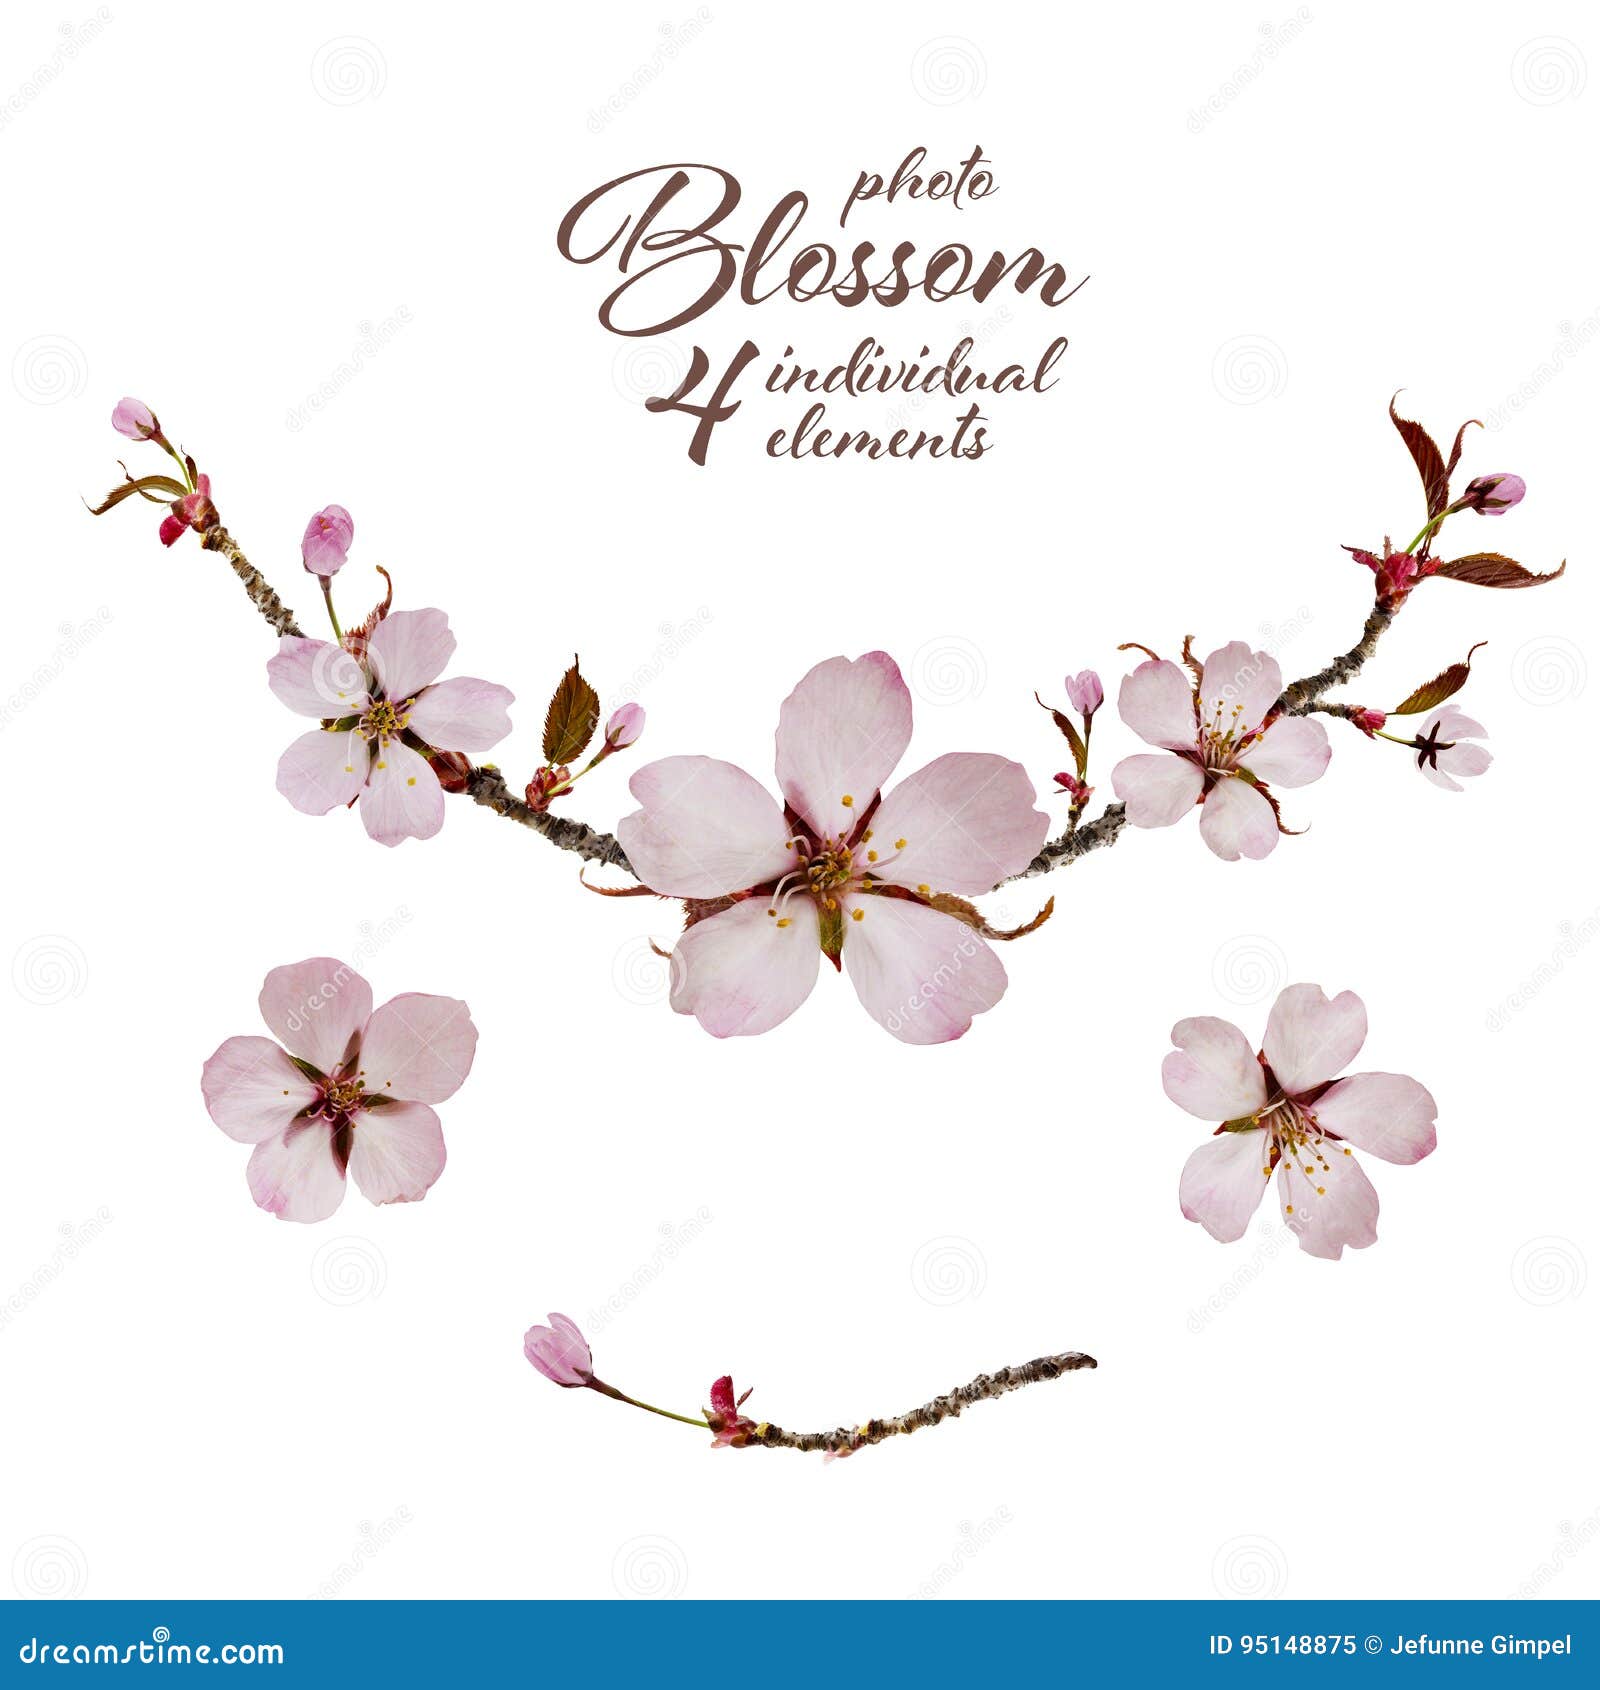 Spring Blossom Design Stock Photo, Picture And Royalty Free Image